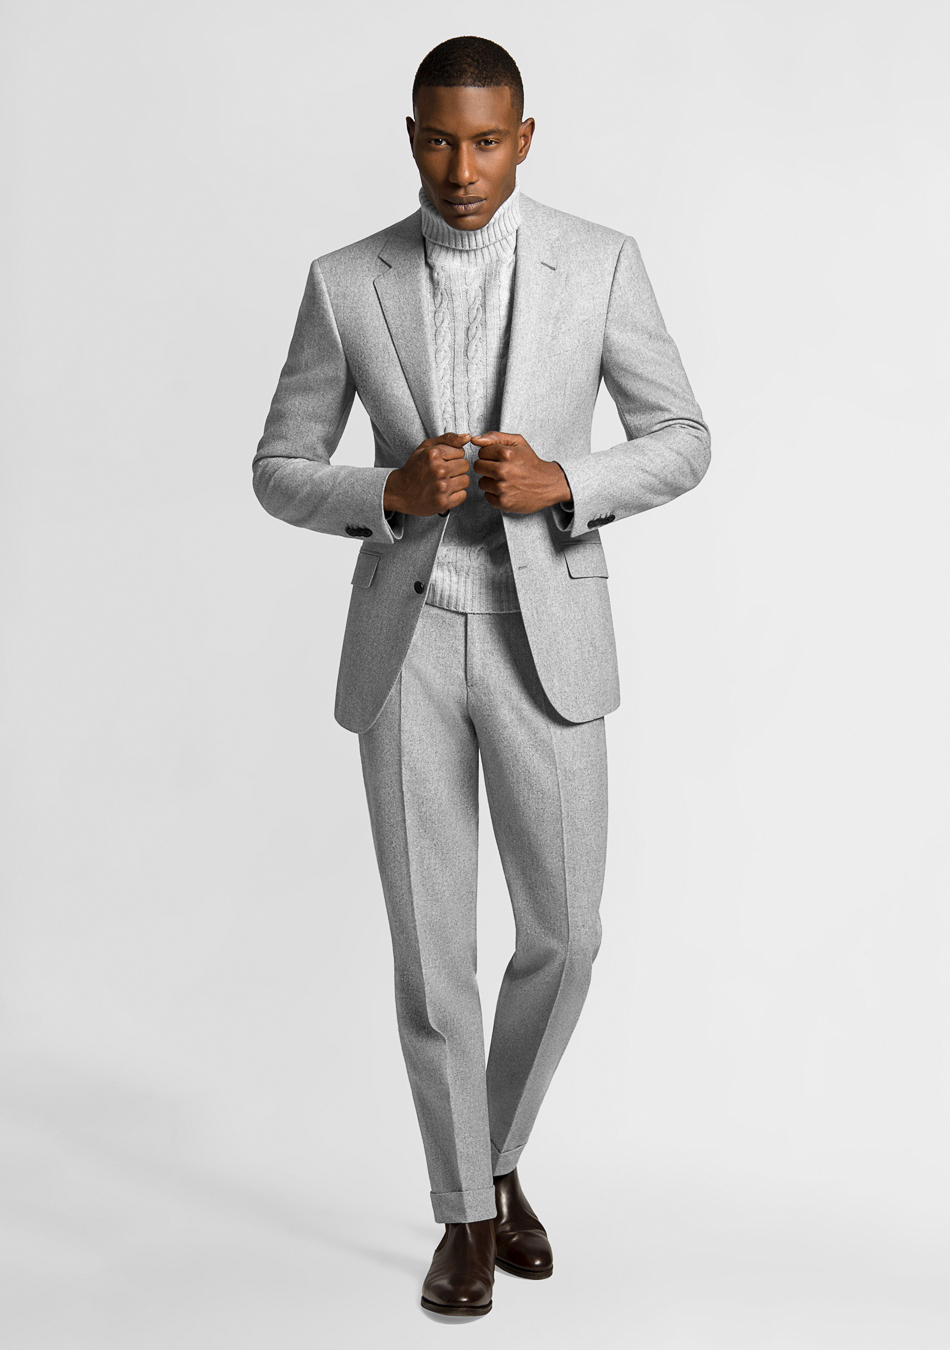 Wearing a light grey flanner suit with a biege turtleneck